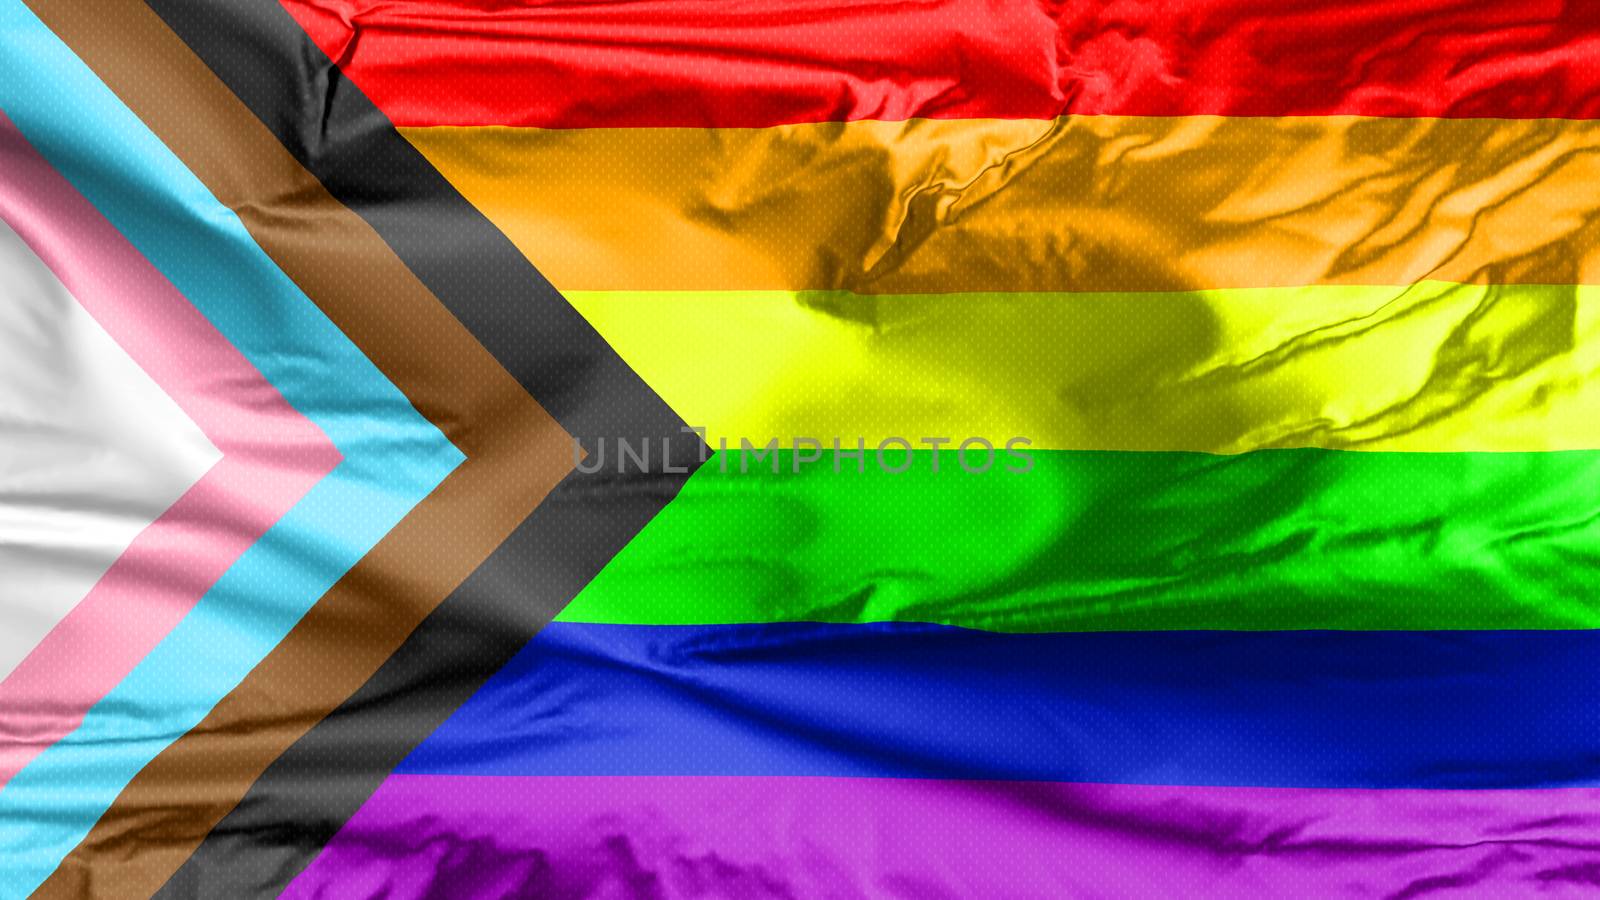 LGBT Rainbow Flag with inclusion and progression colors. Symbol of lesbian, gay, bisexual & transgender community. Black and brown stripes to represent marginalised LGBT also with the colours pink, light blue and white, which are sign of the Transgender Pride Flag.